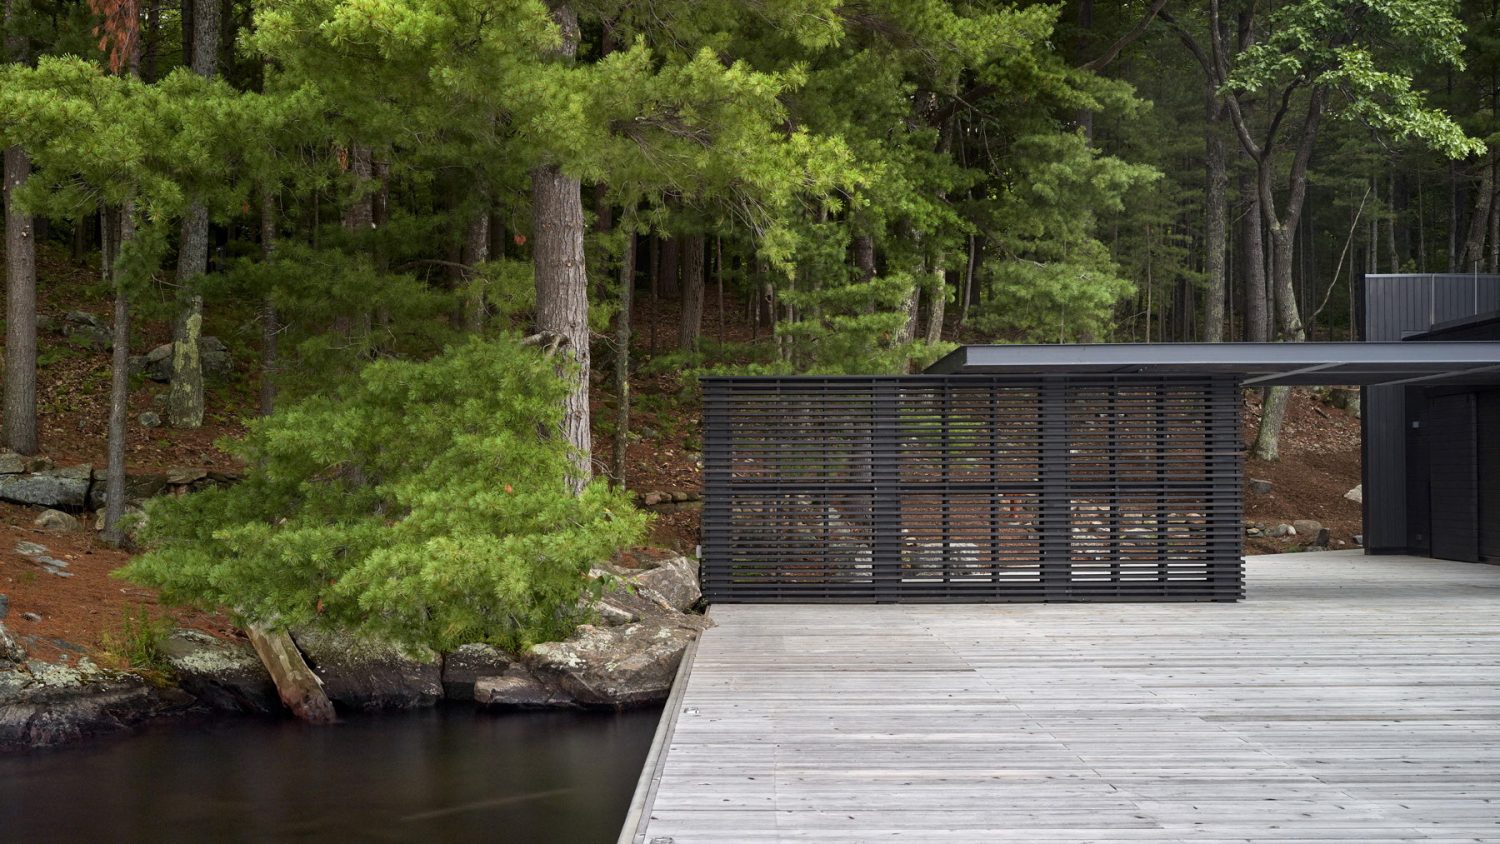 Lake Rosseau Boathouse – Guest Residence by Akb Architects